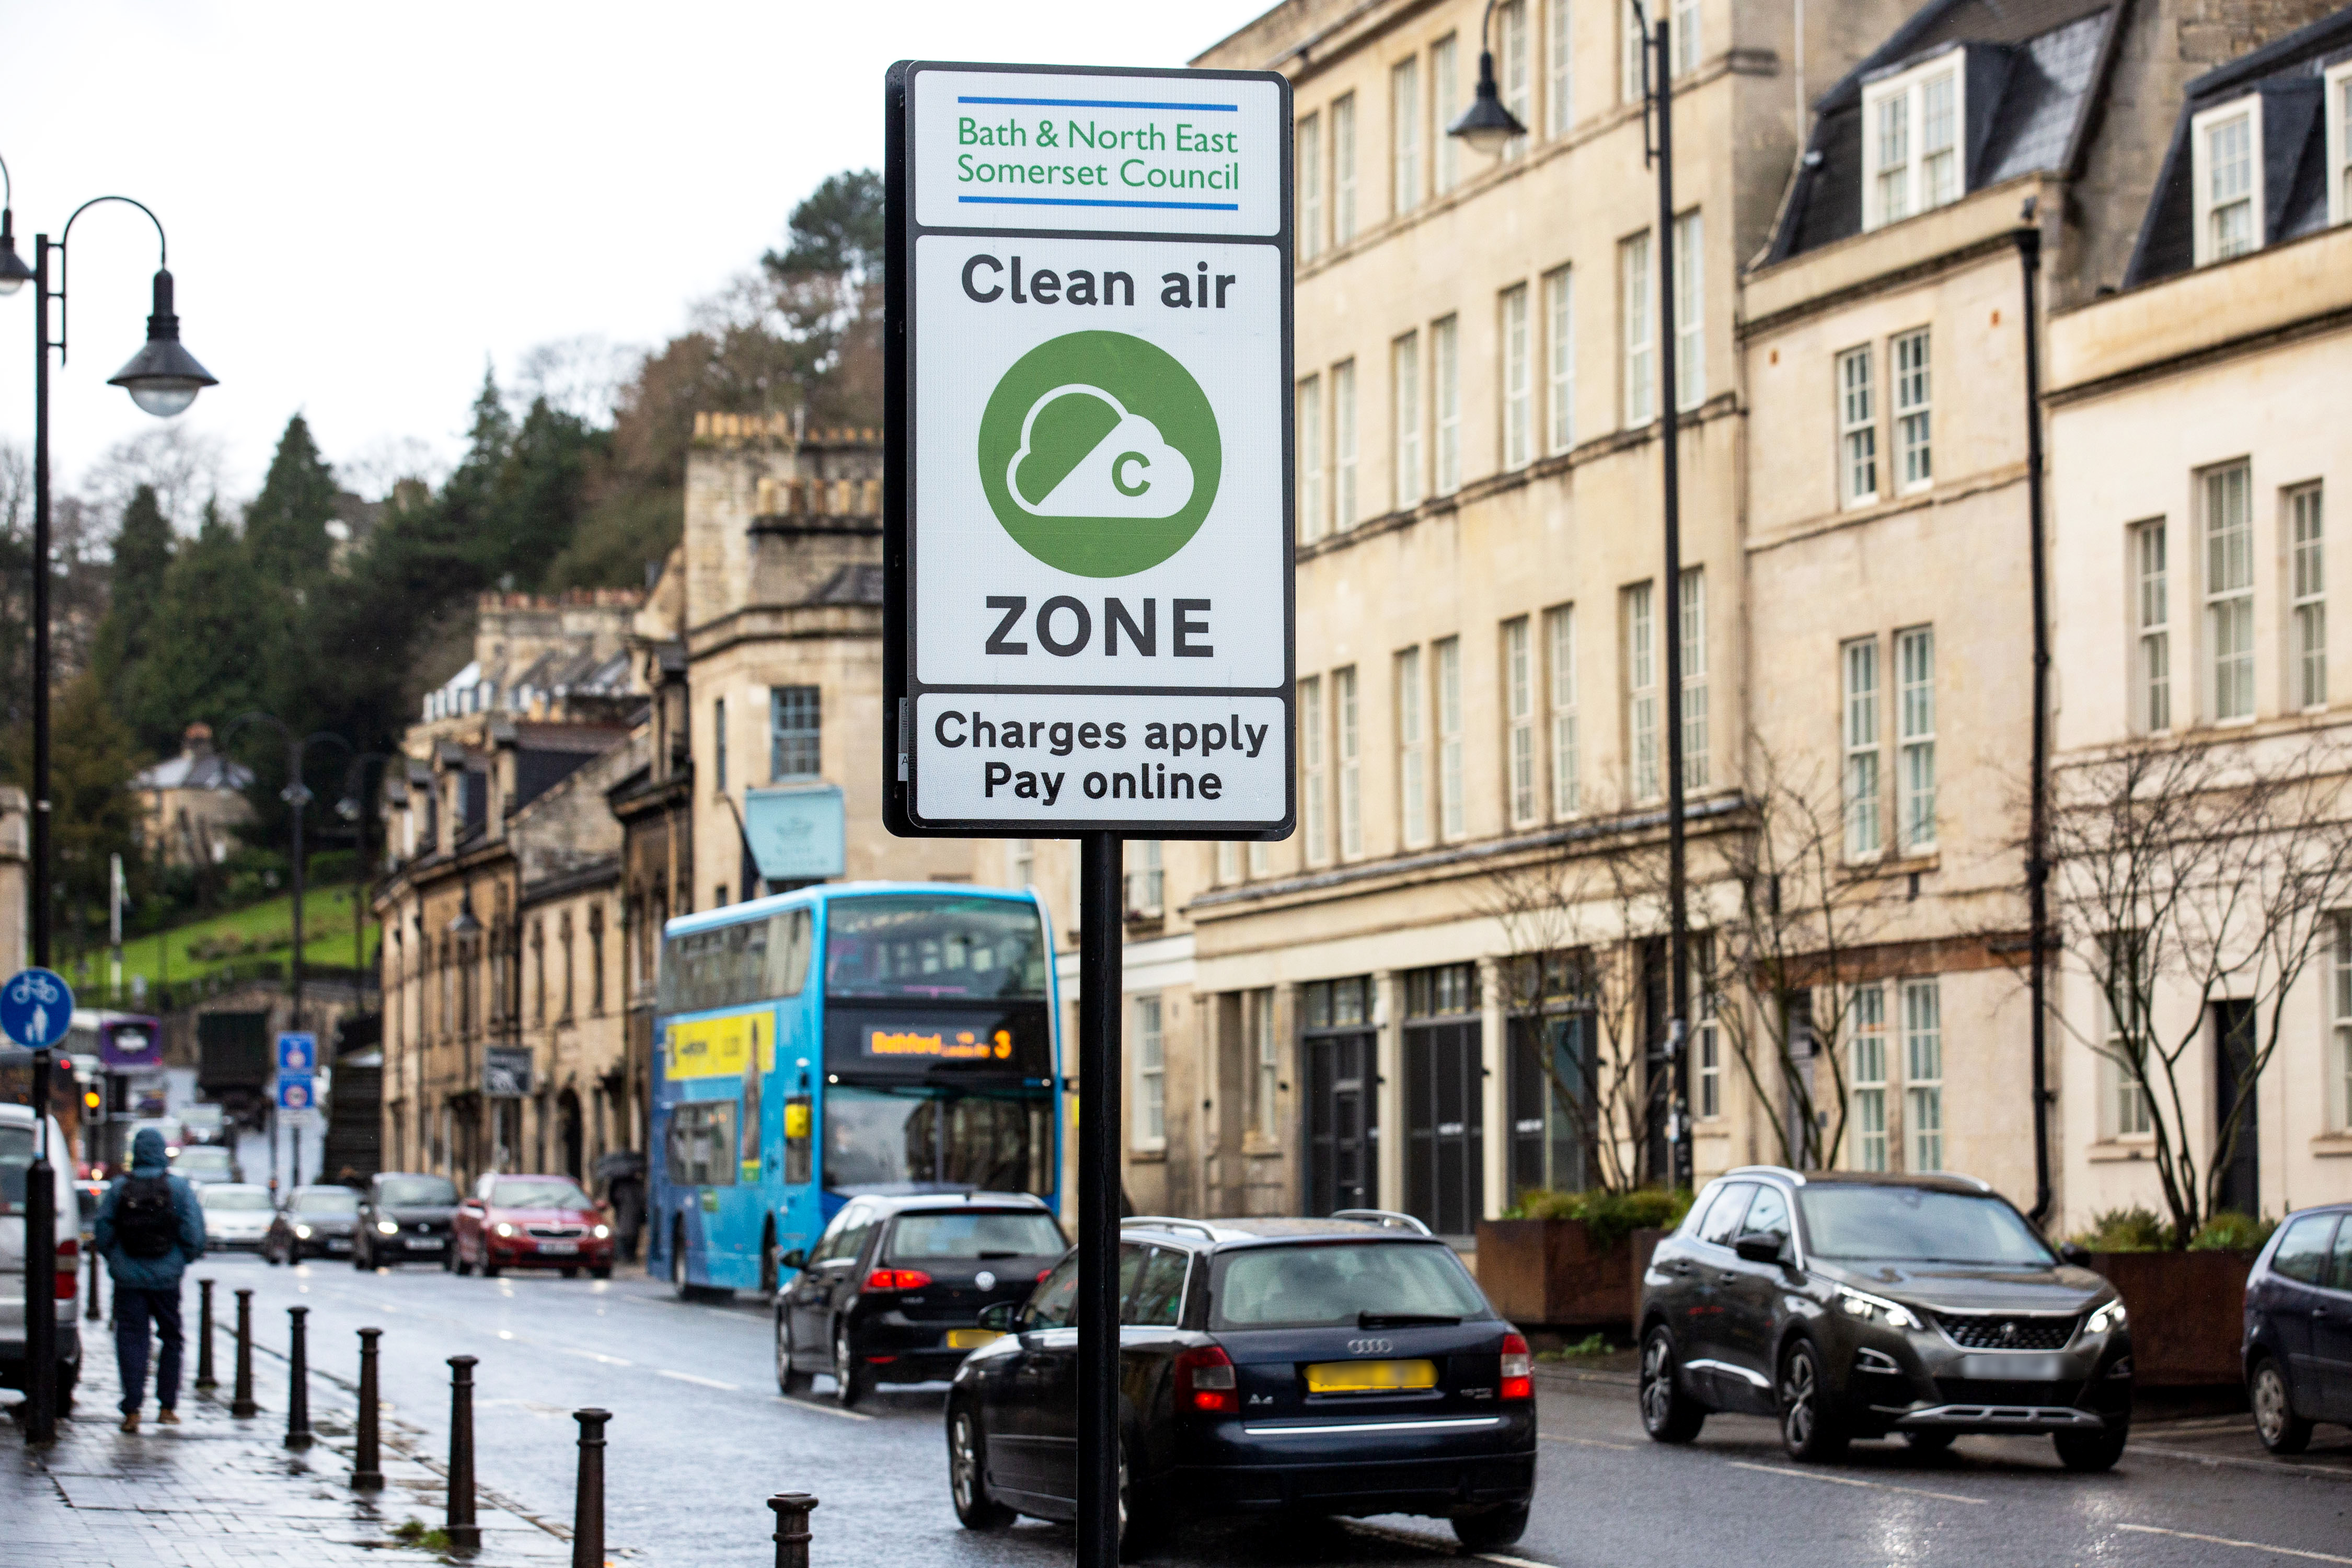 New figures show Bath’s Clean Air Zone is working 